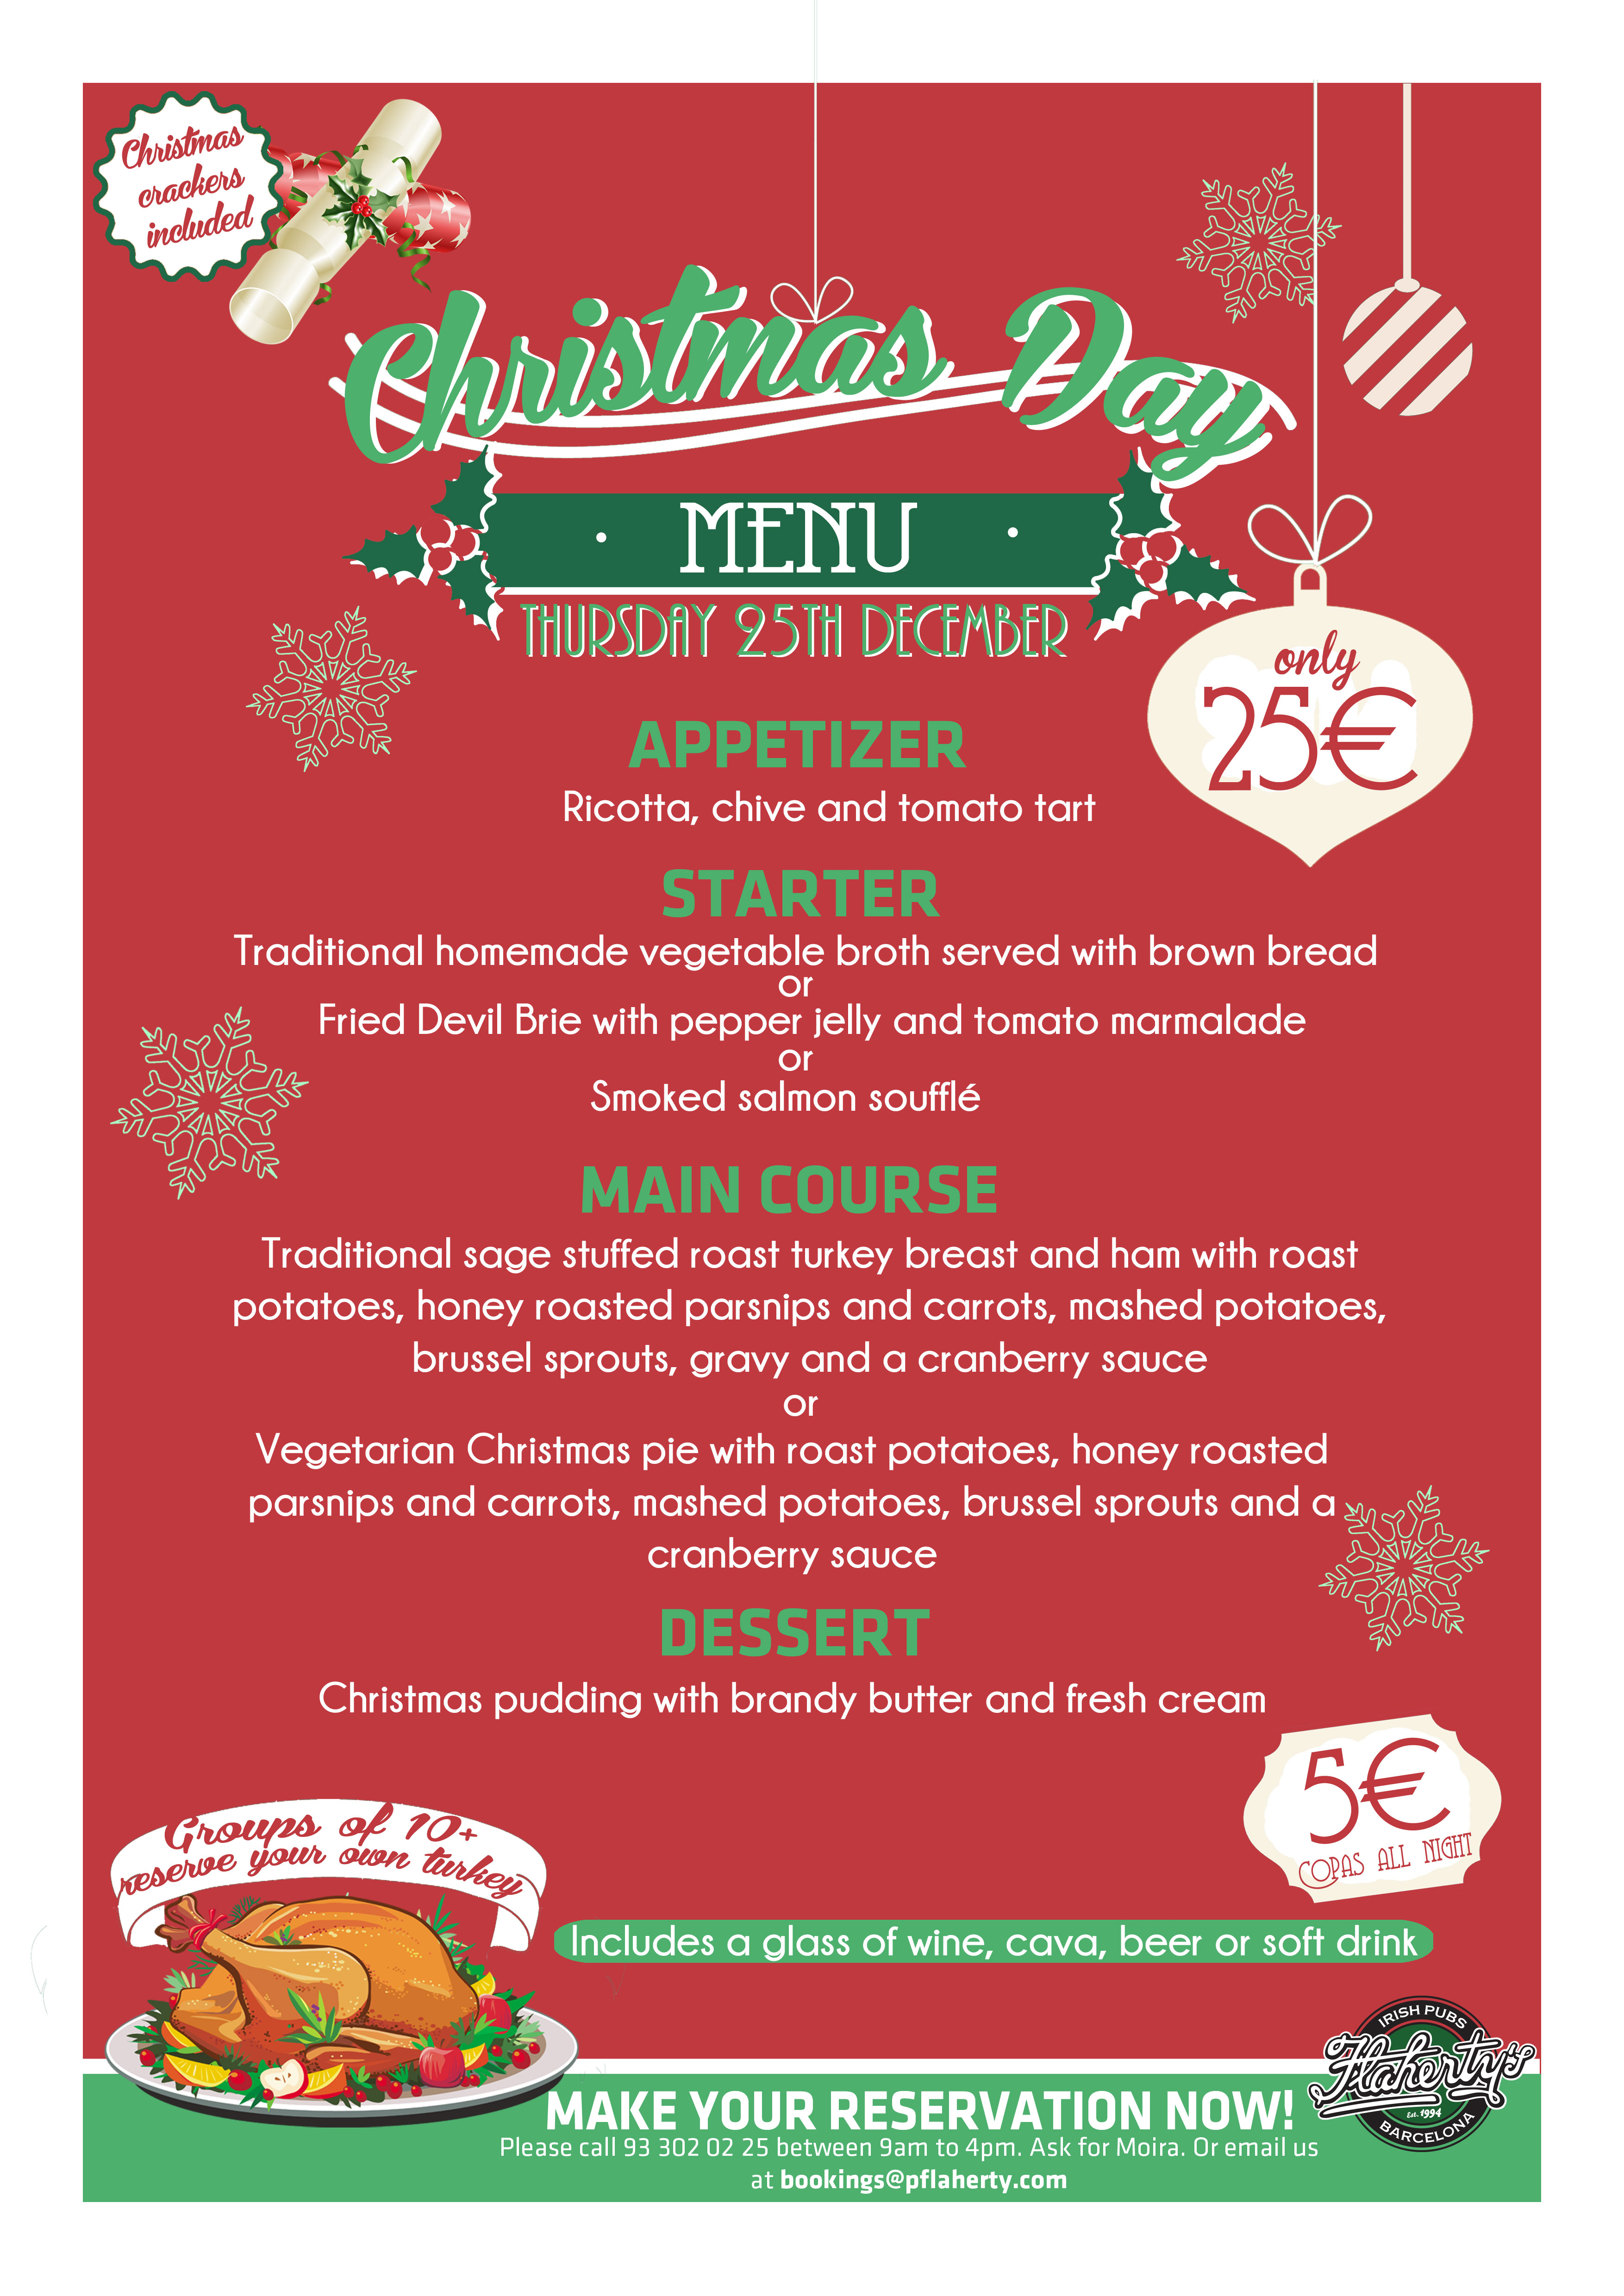 Celebrate Christmas at Flaherty's